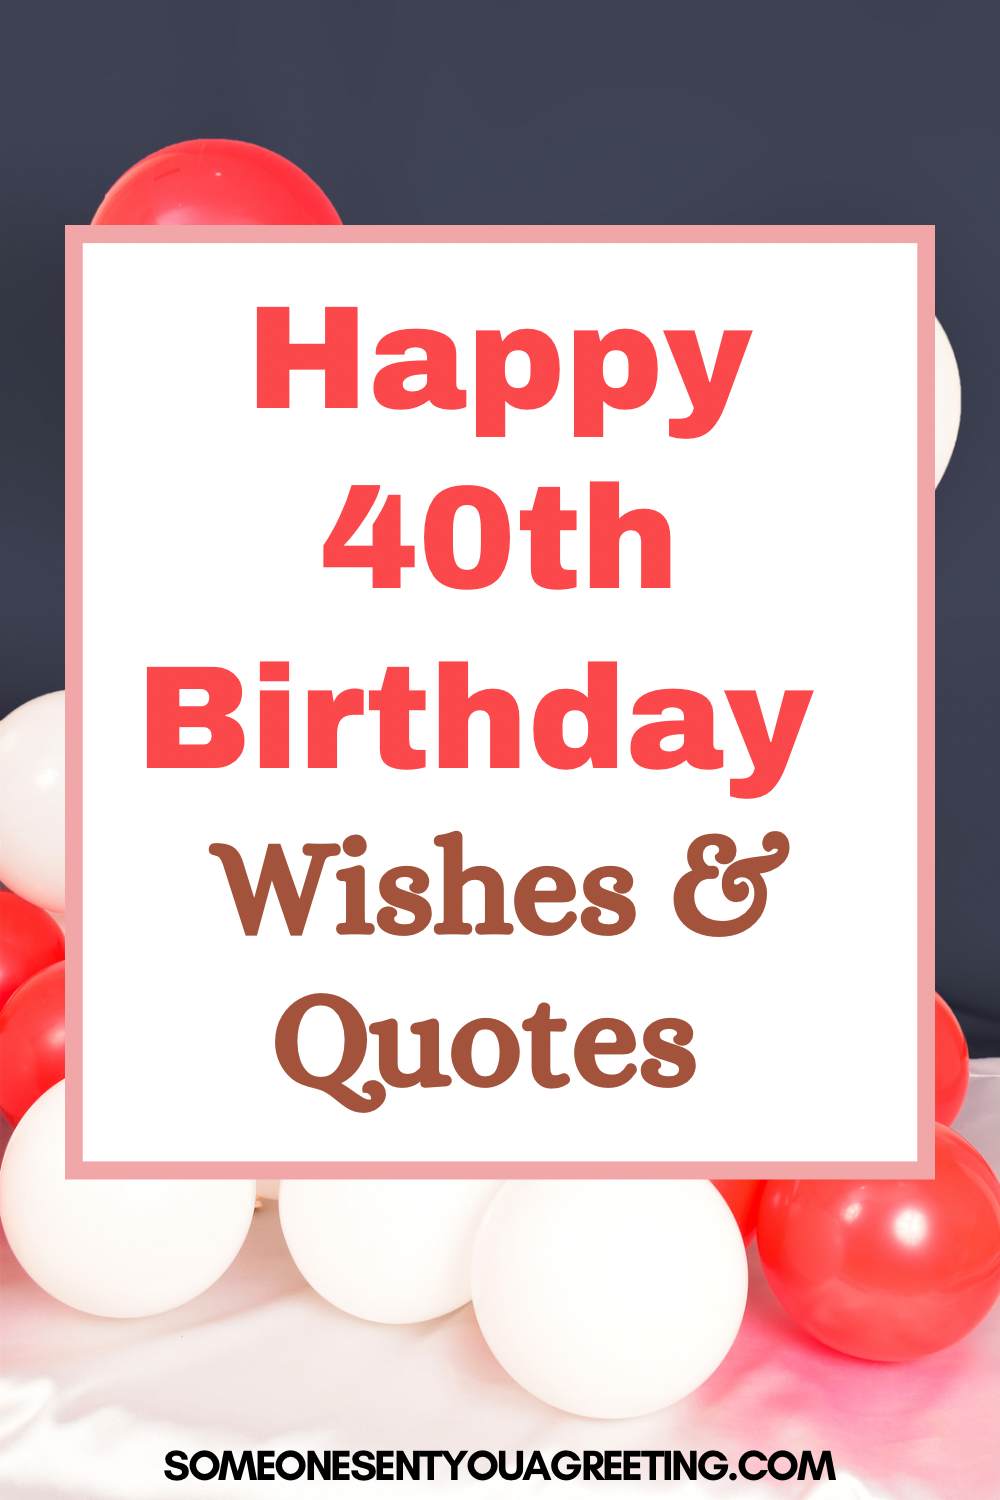 40th birthday wishes messages and quotes